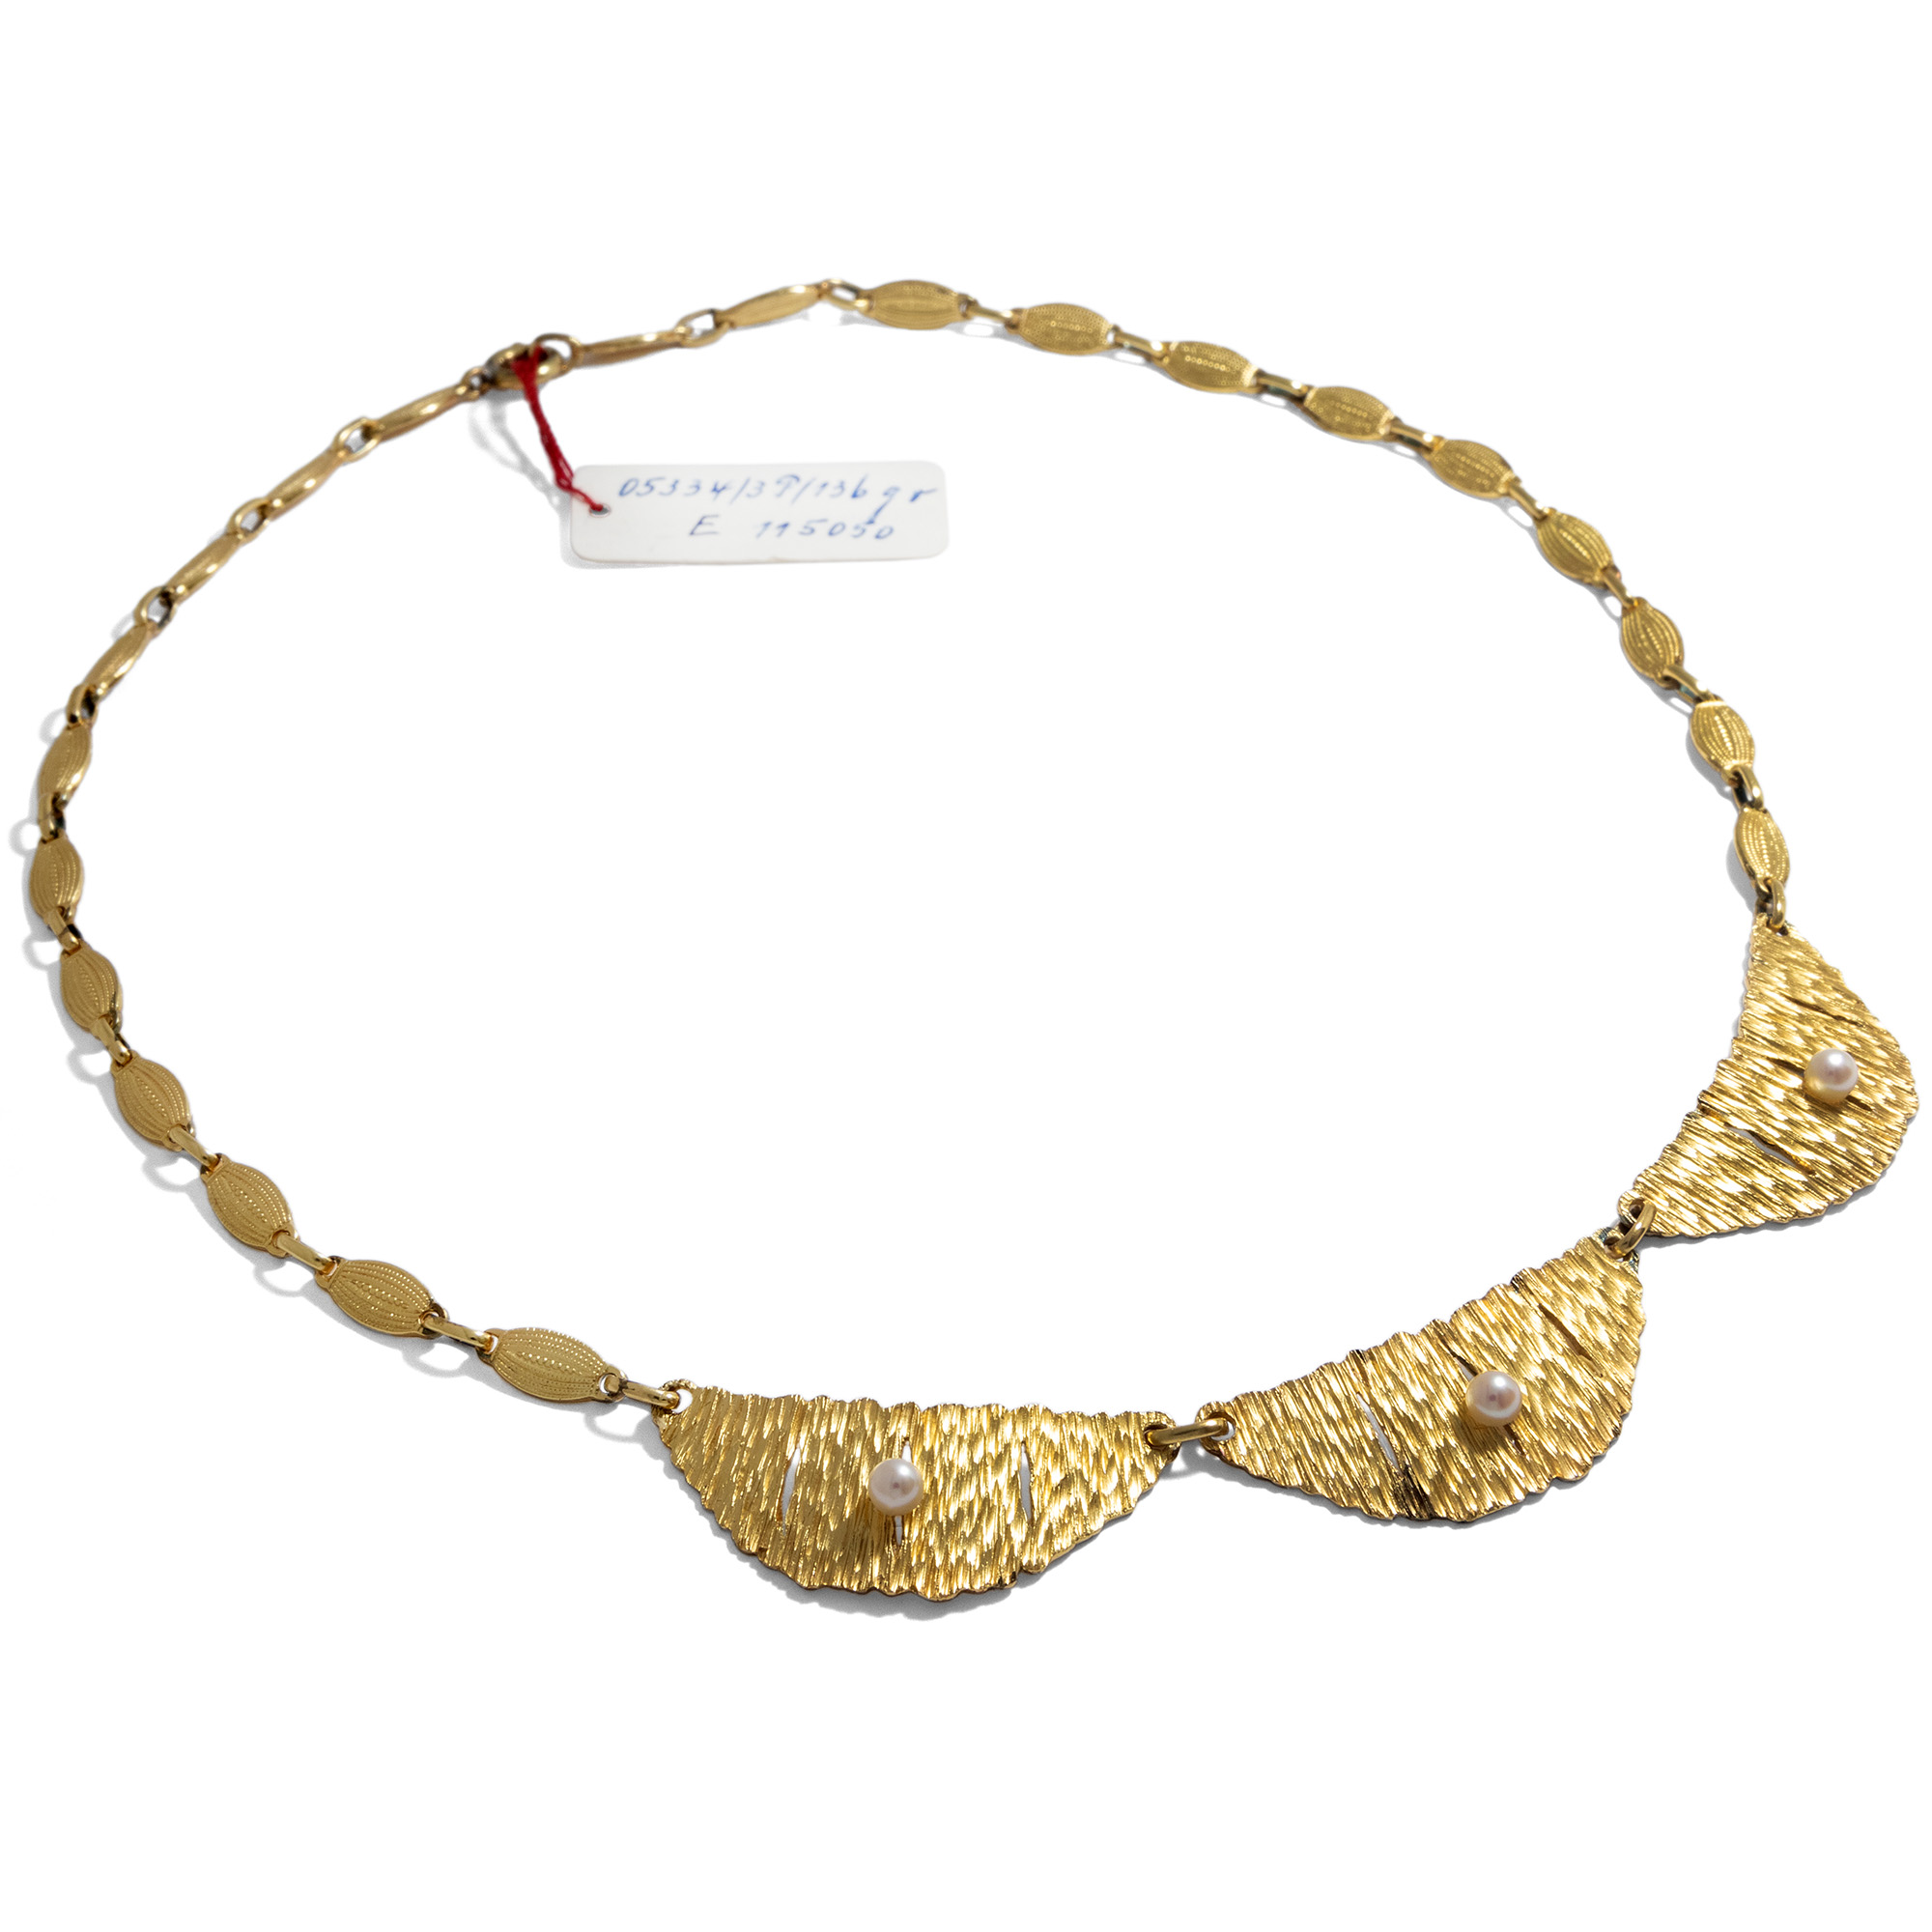 Stylish Midcentury Necklace in Gilded Silver by Theodor Fahrner, 1950s